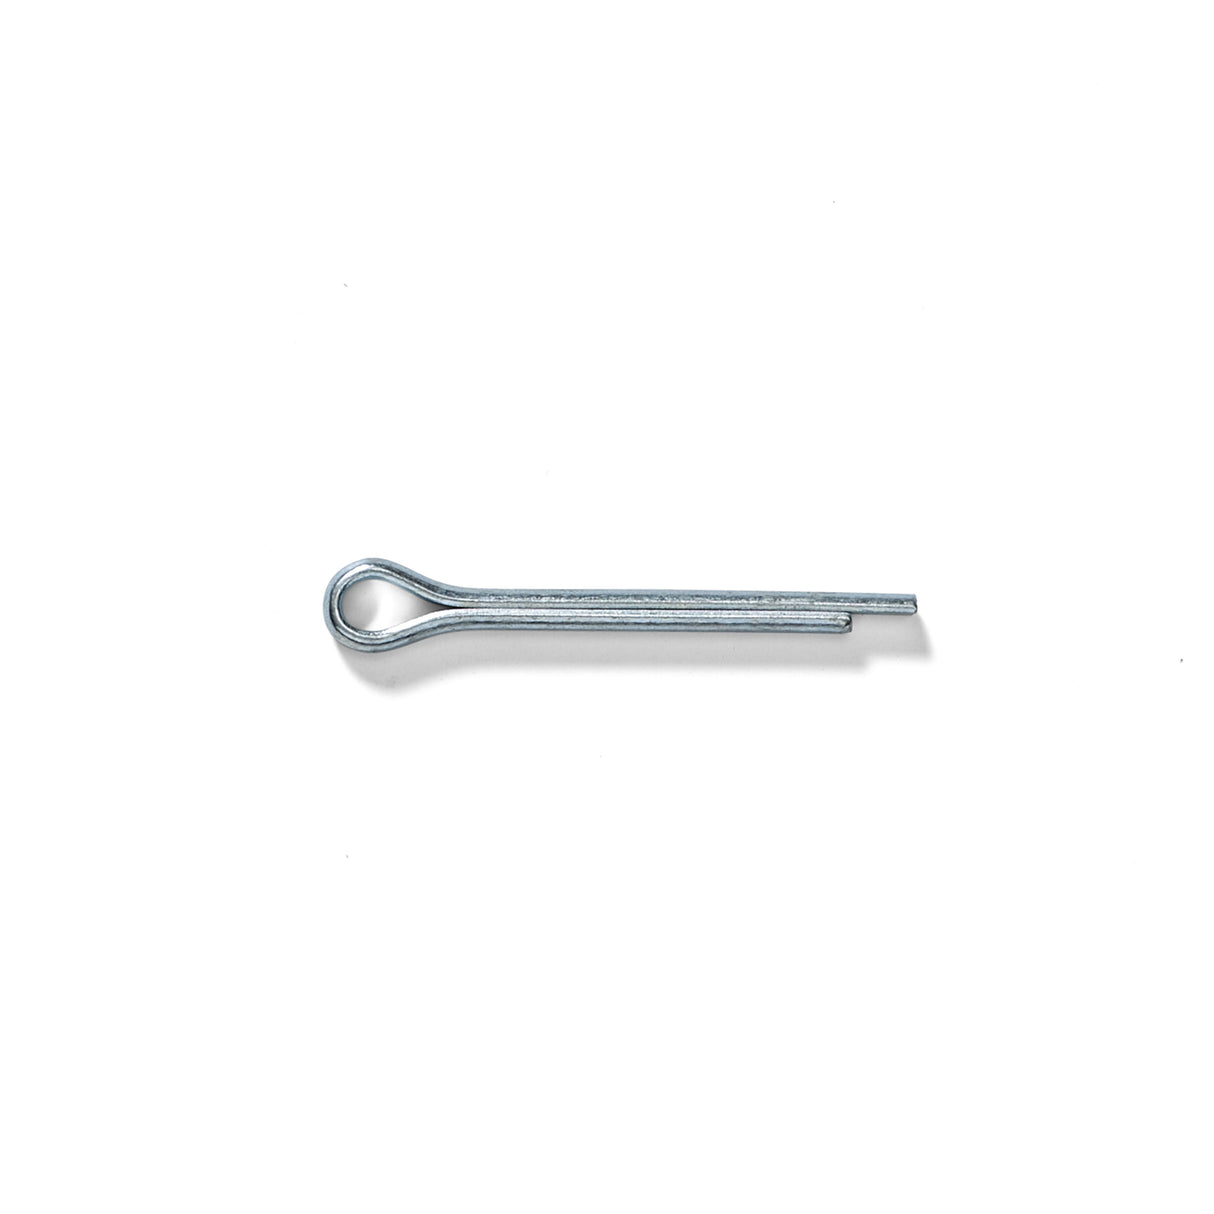 Cotter Pin for CM-2 and CM-3 Mooring Iron